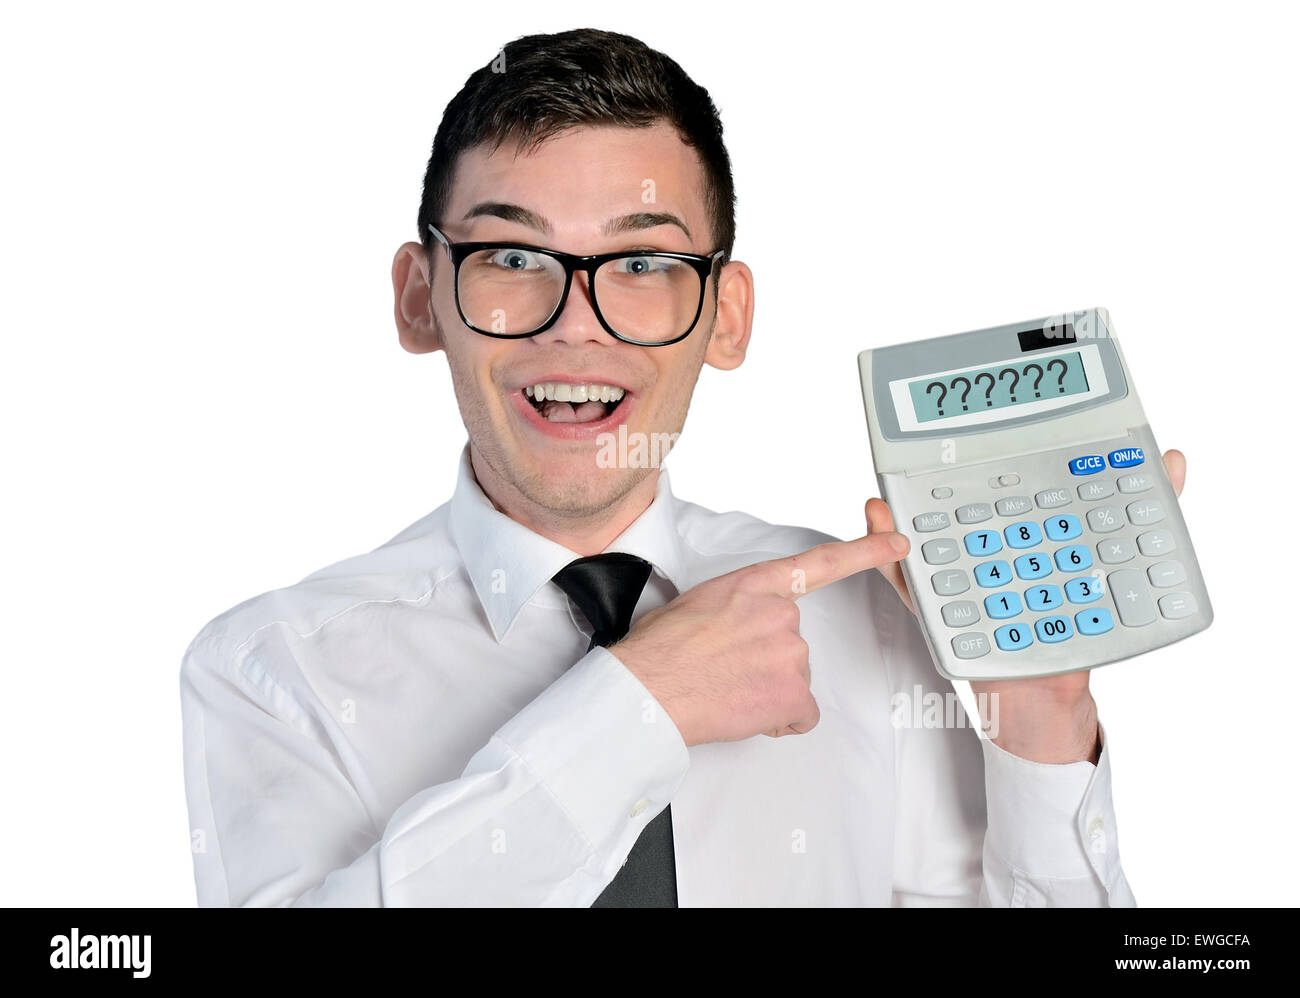 Funny man with hand calculator Stock Photo - Alamy